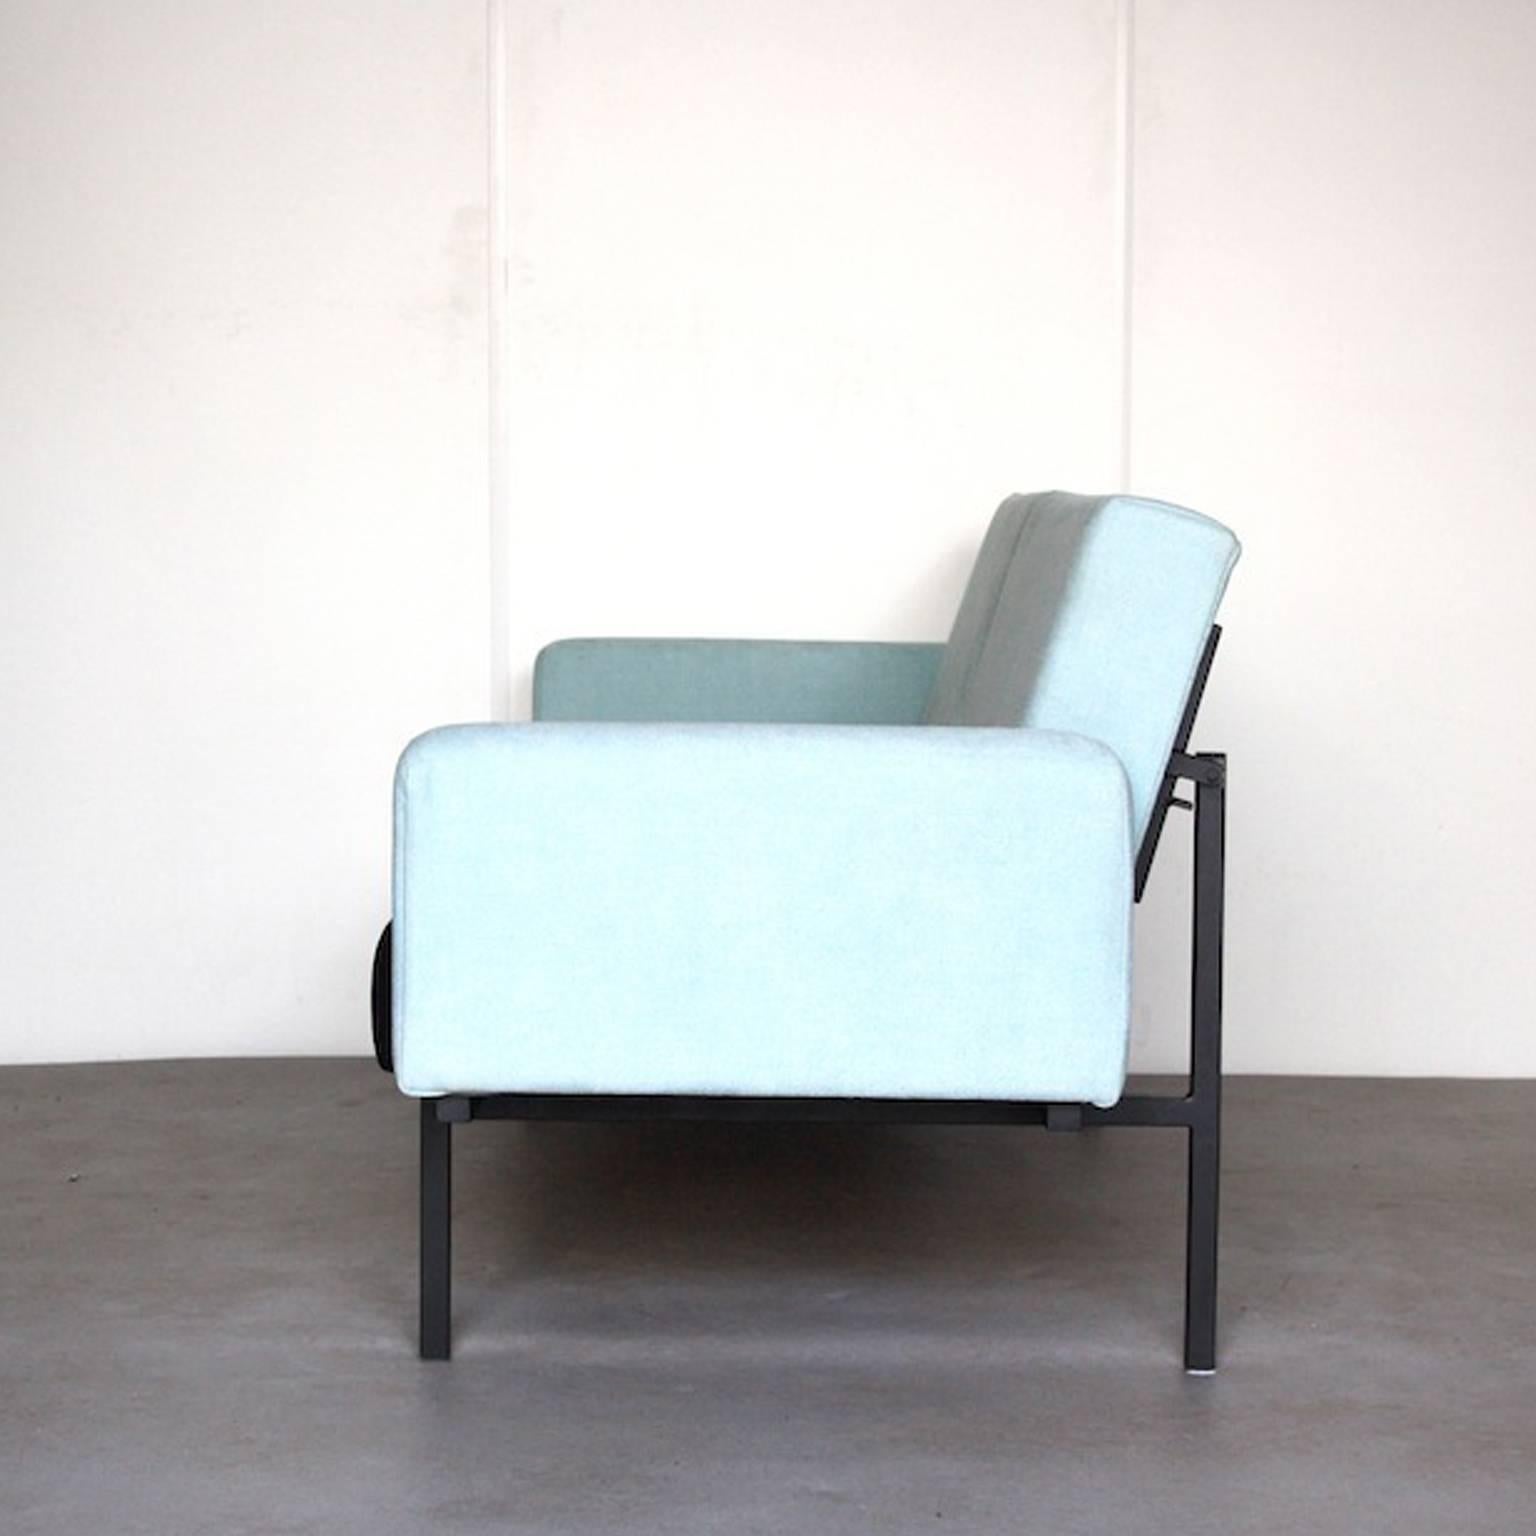 Mid-20th Century Sofa or Daybed by Coen de Vries for Devo, Dutch Design, 1952 For Sale